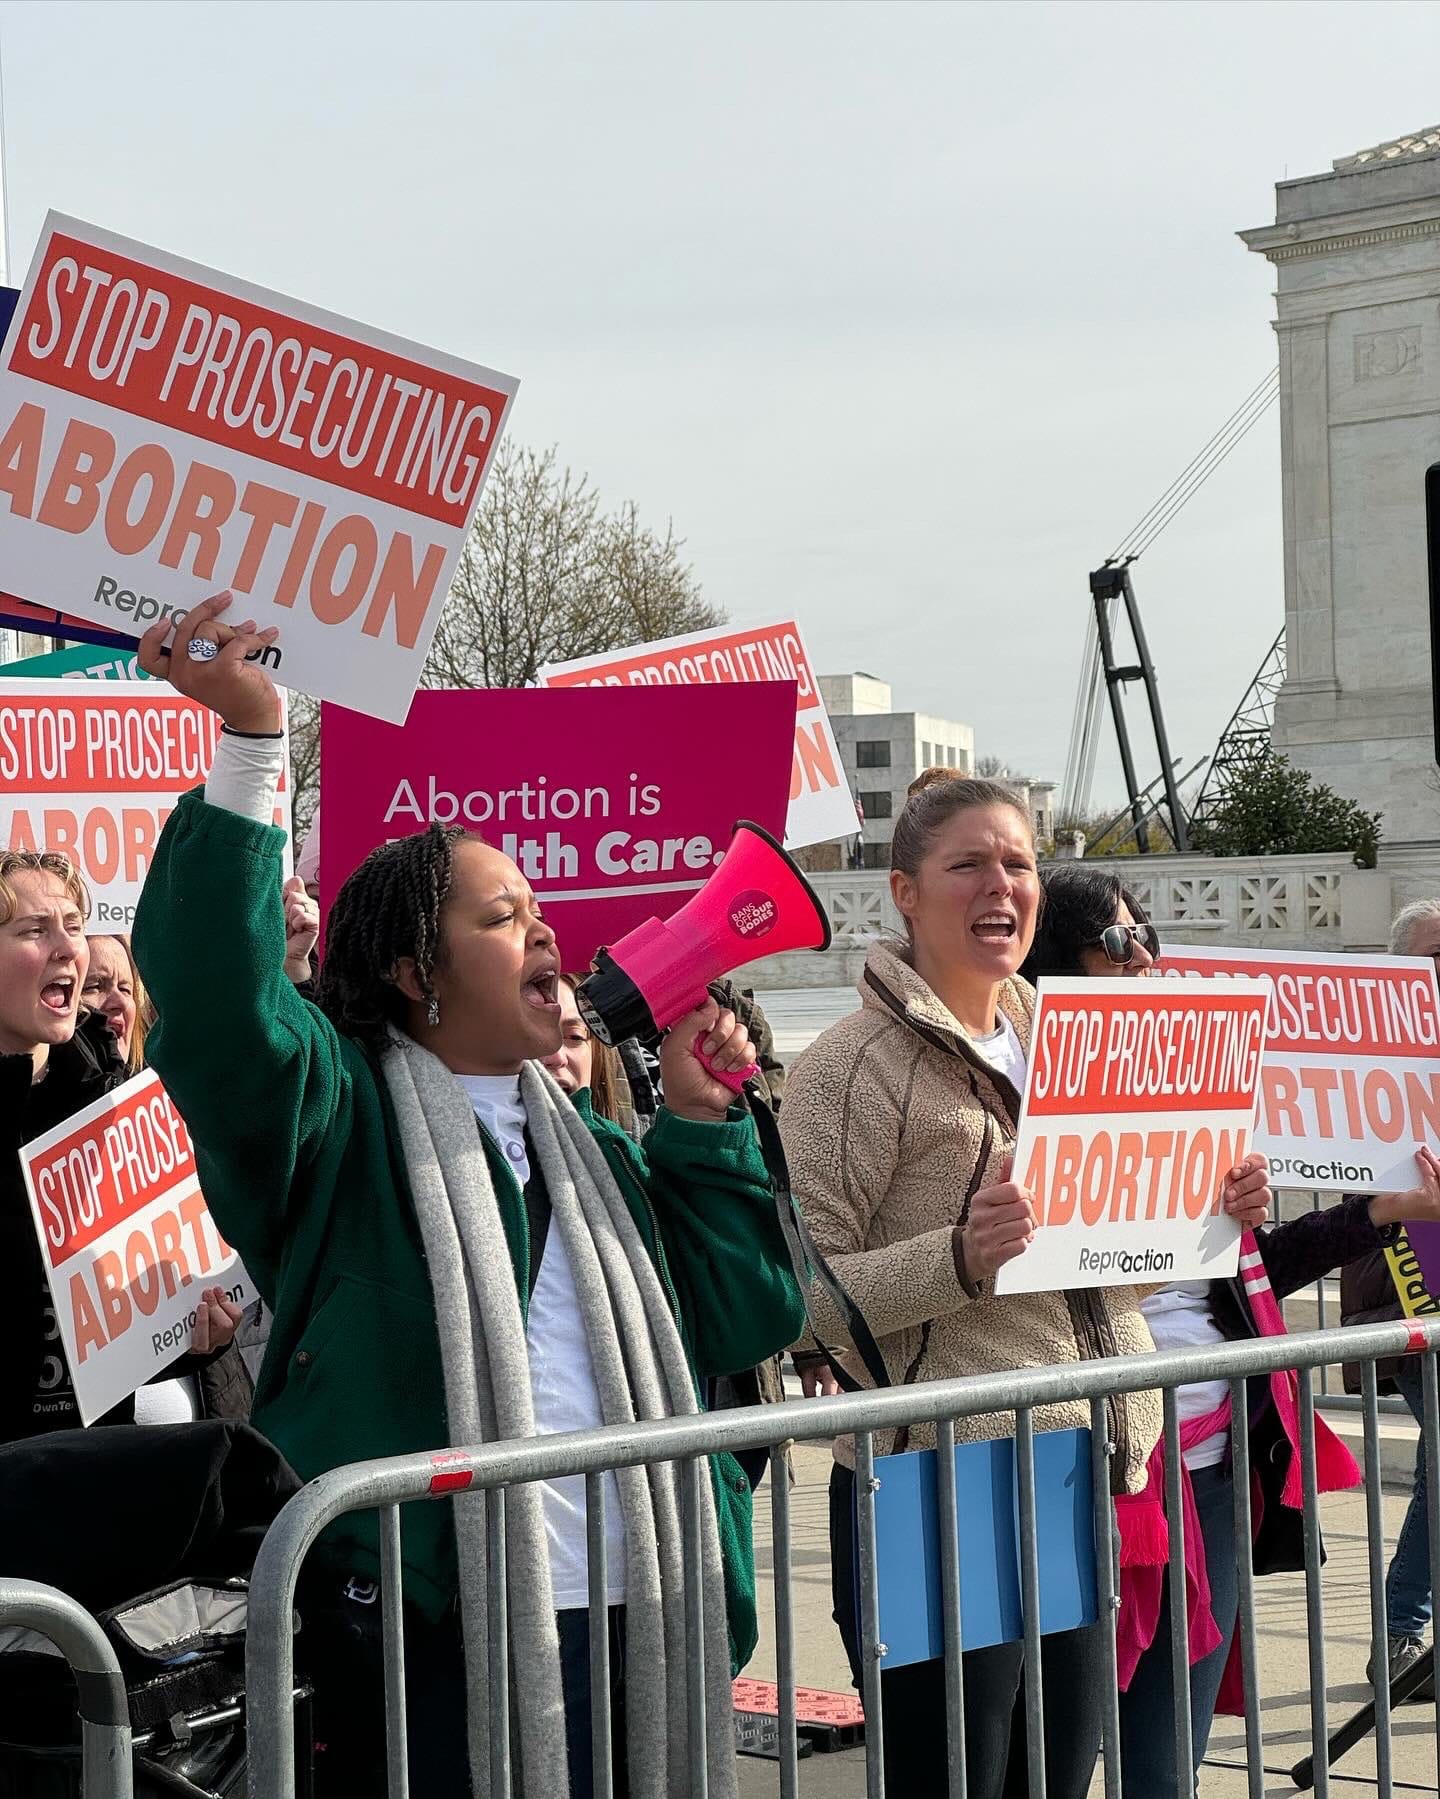 Two people stand in a crowd behind a police barrier. One yells into a megaphone while the other chants. The crowd holds signs that read Stop Prosecuting Abortion and Abortion is Health Care.